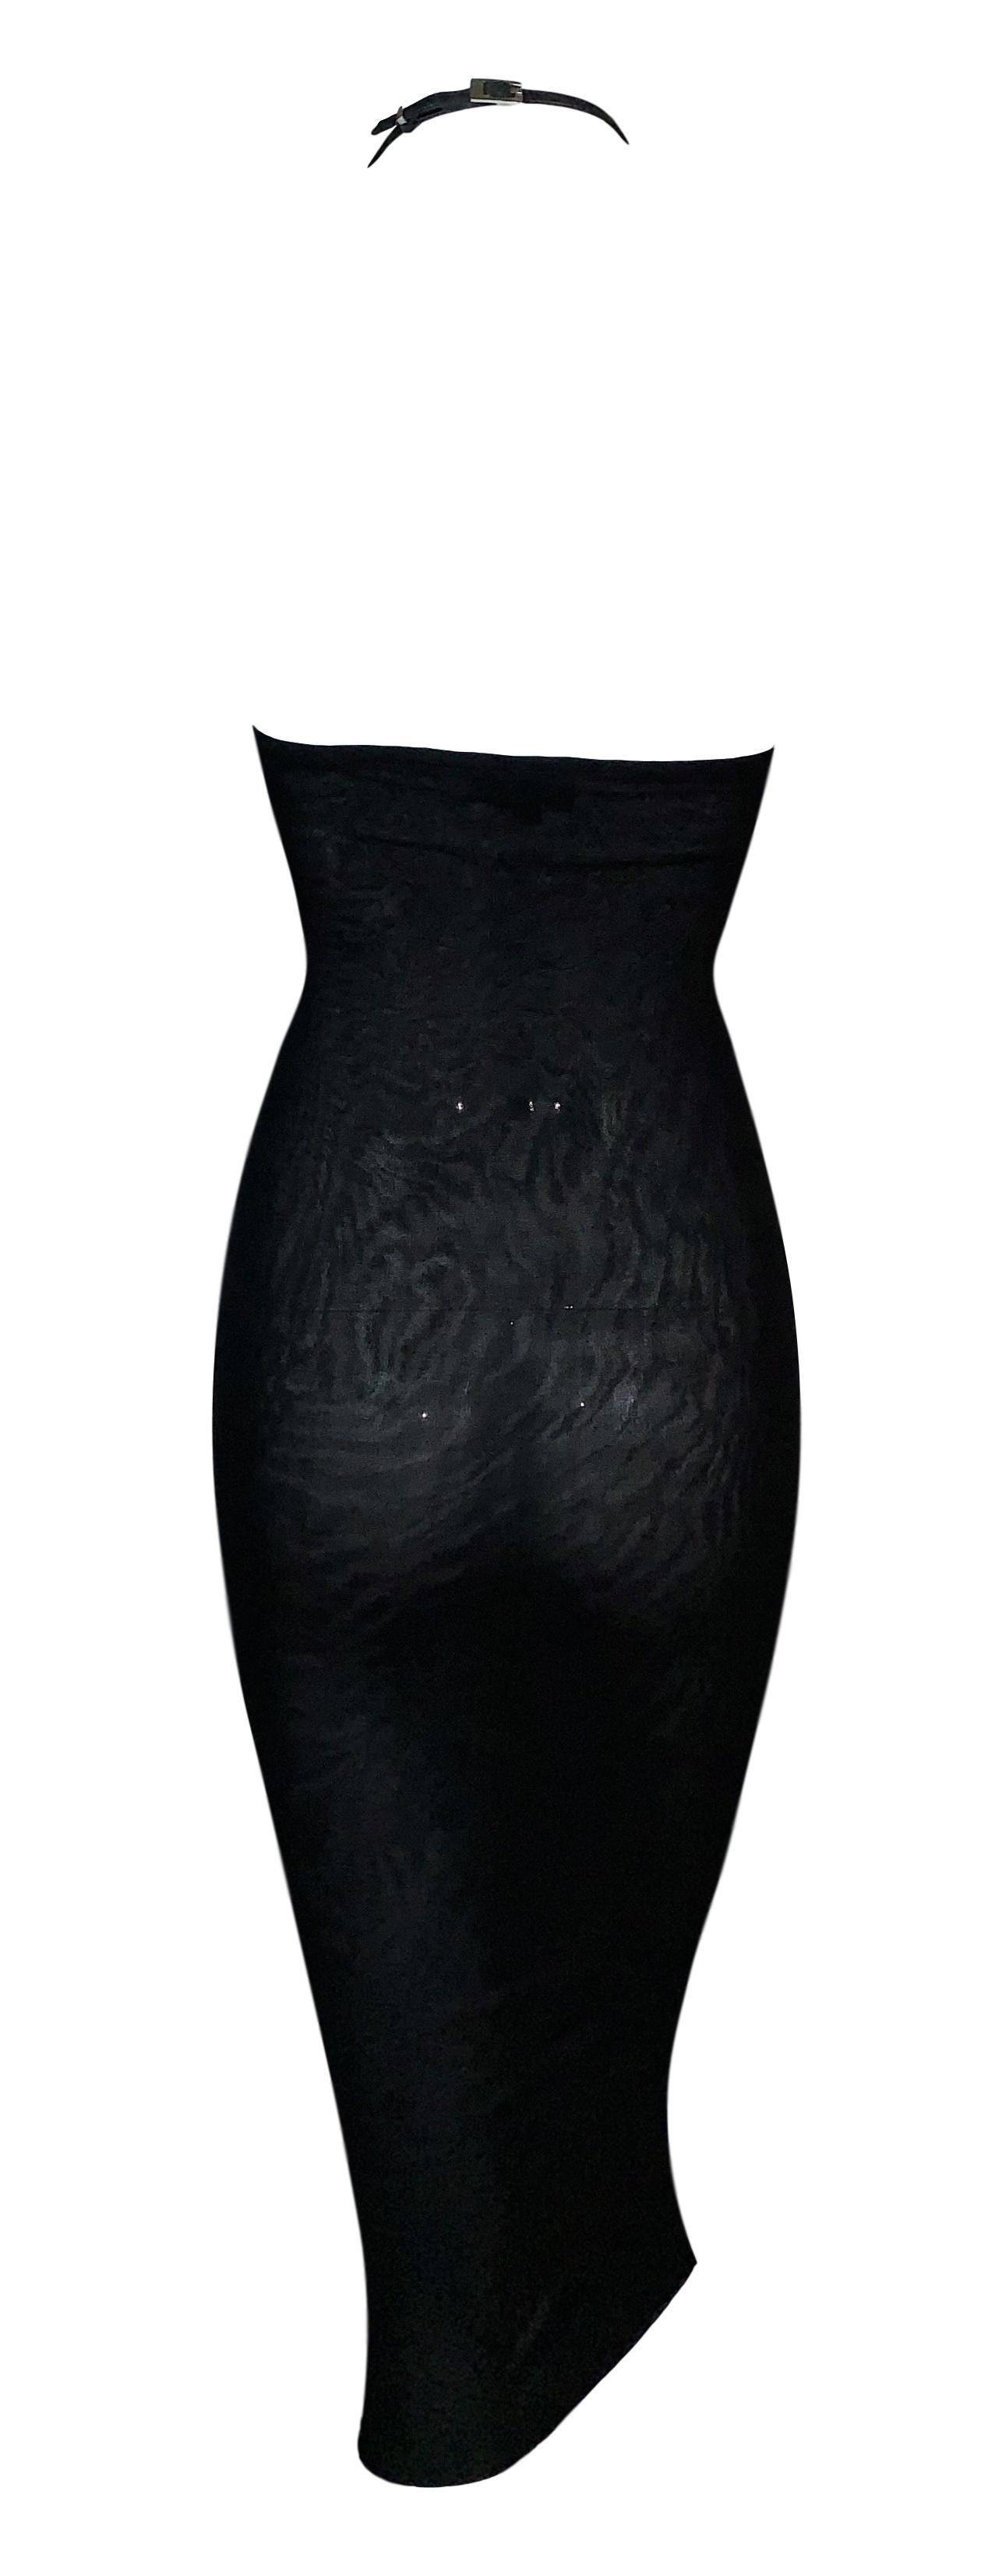 S/S 1998 Gucci Tom Ford Sheer Black Bodycon Leather Choker Wiggle Dress In Good Condition In Yukon, OK